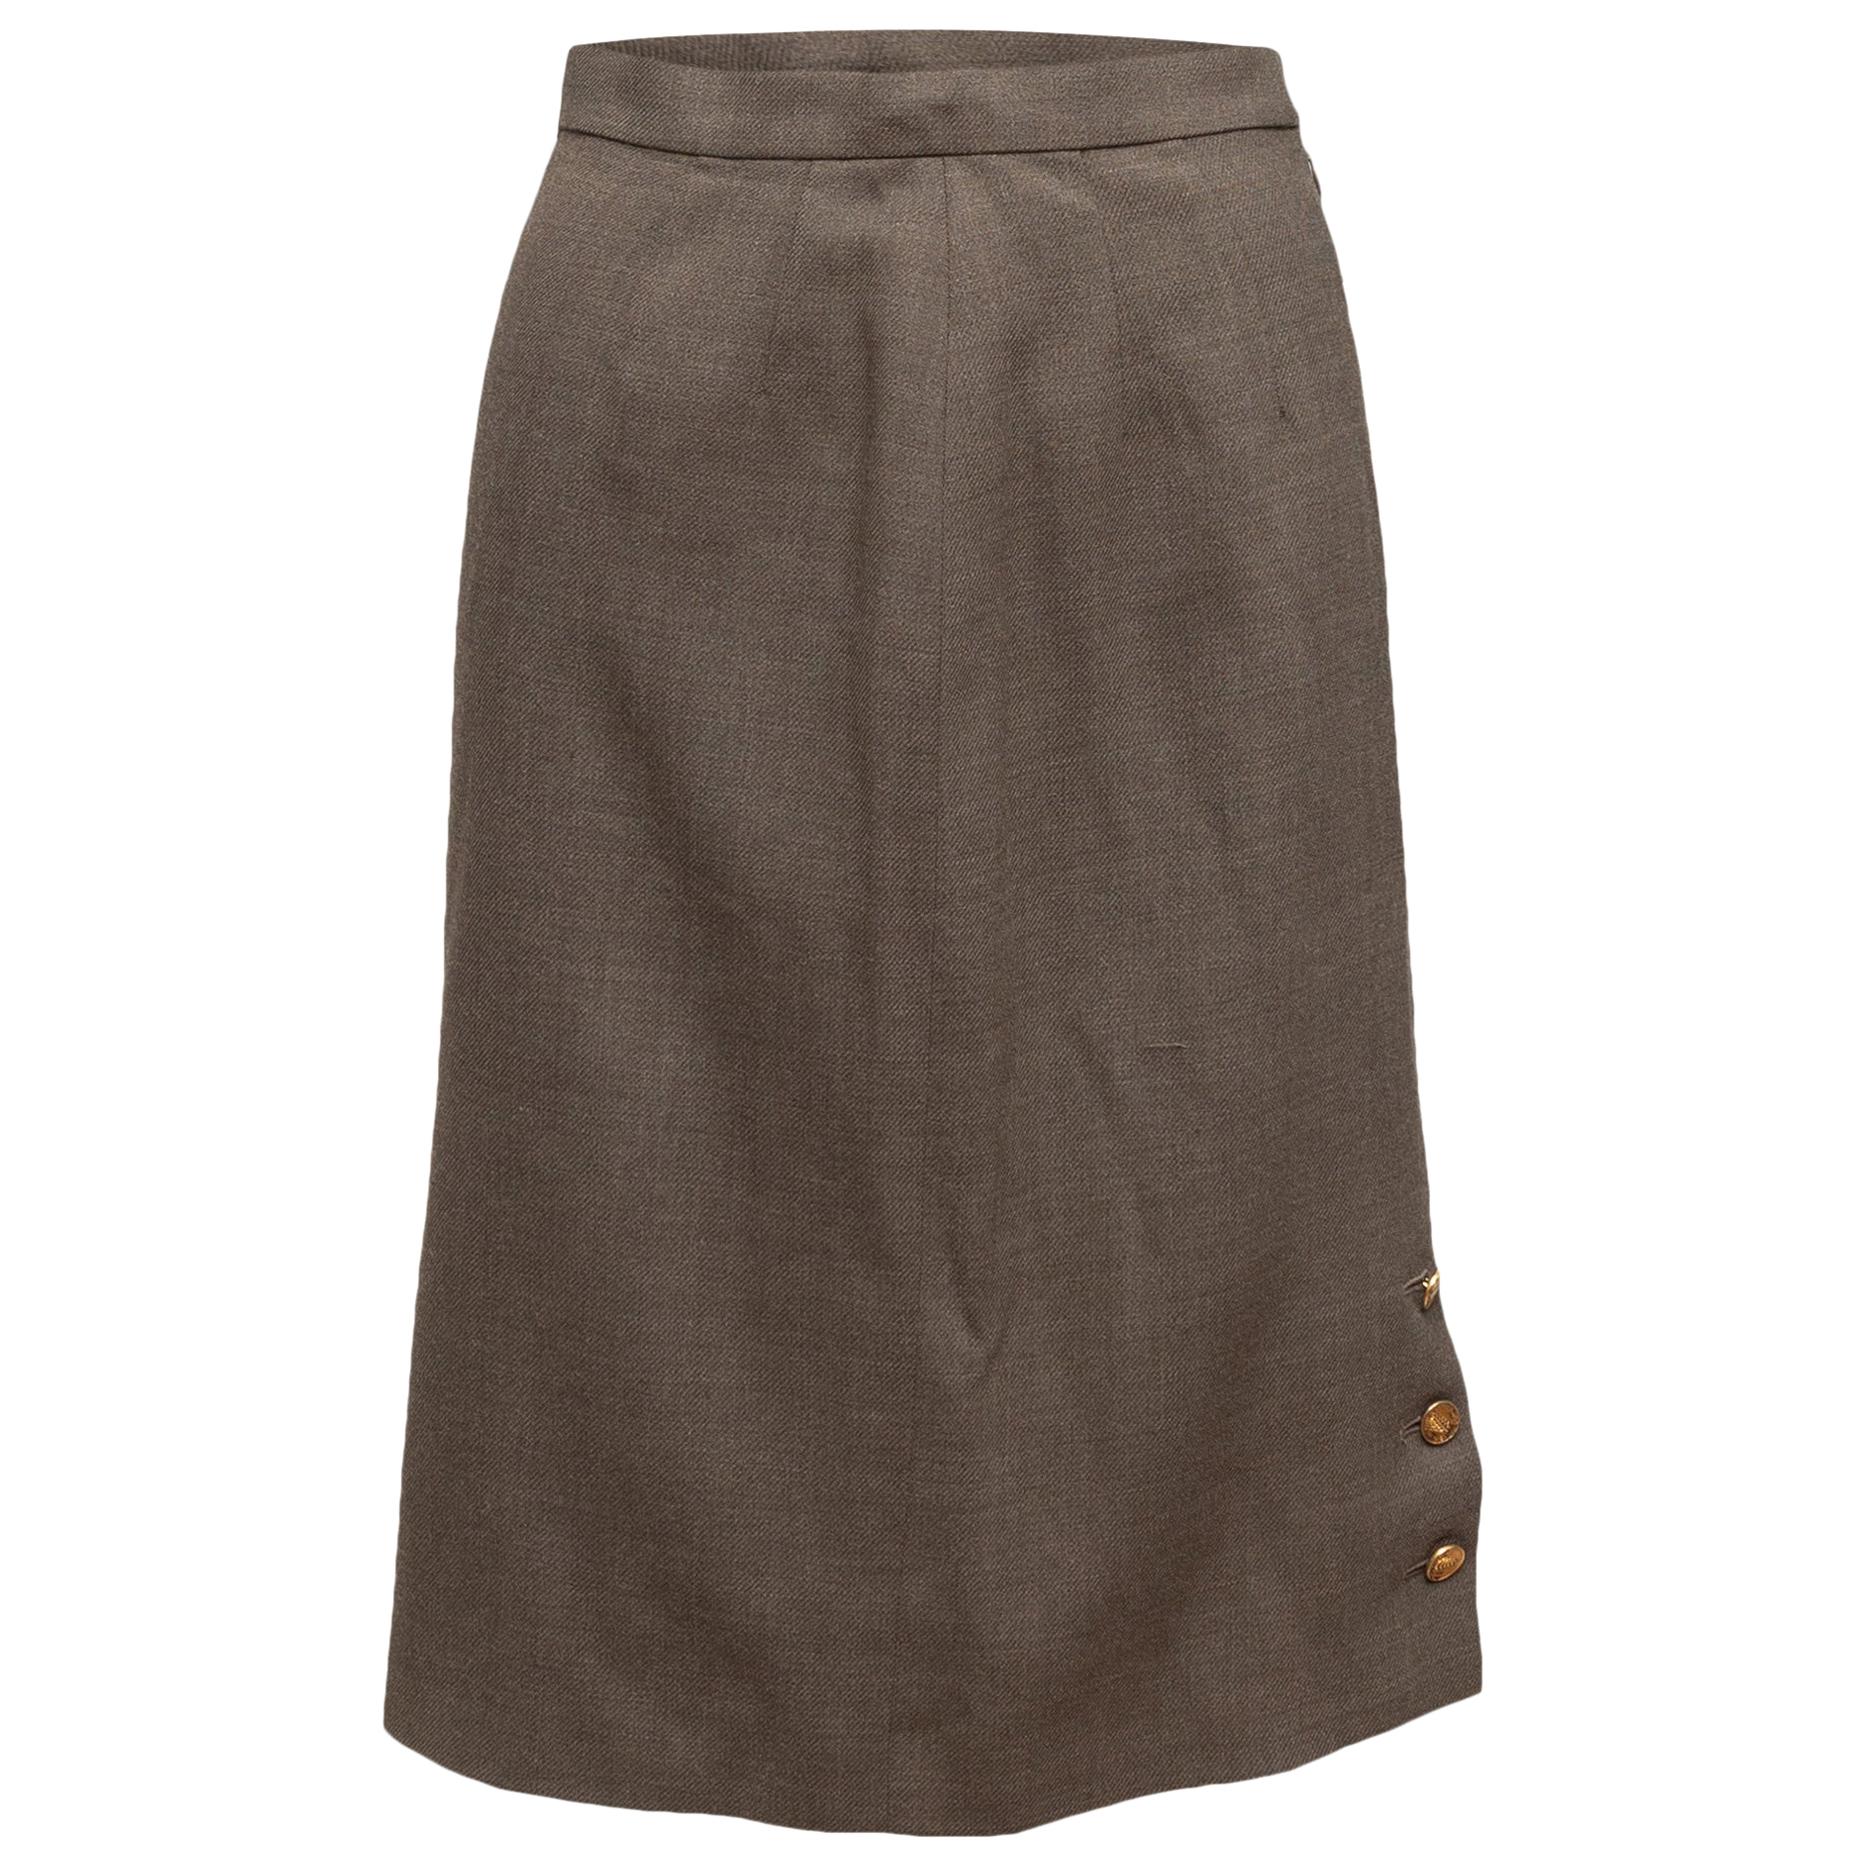  Chanel Boutique Light Brown Wool Skirt